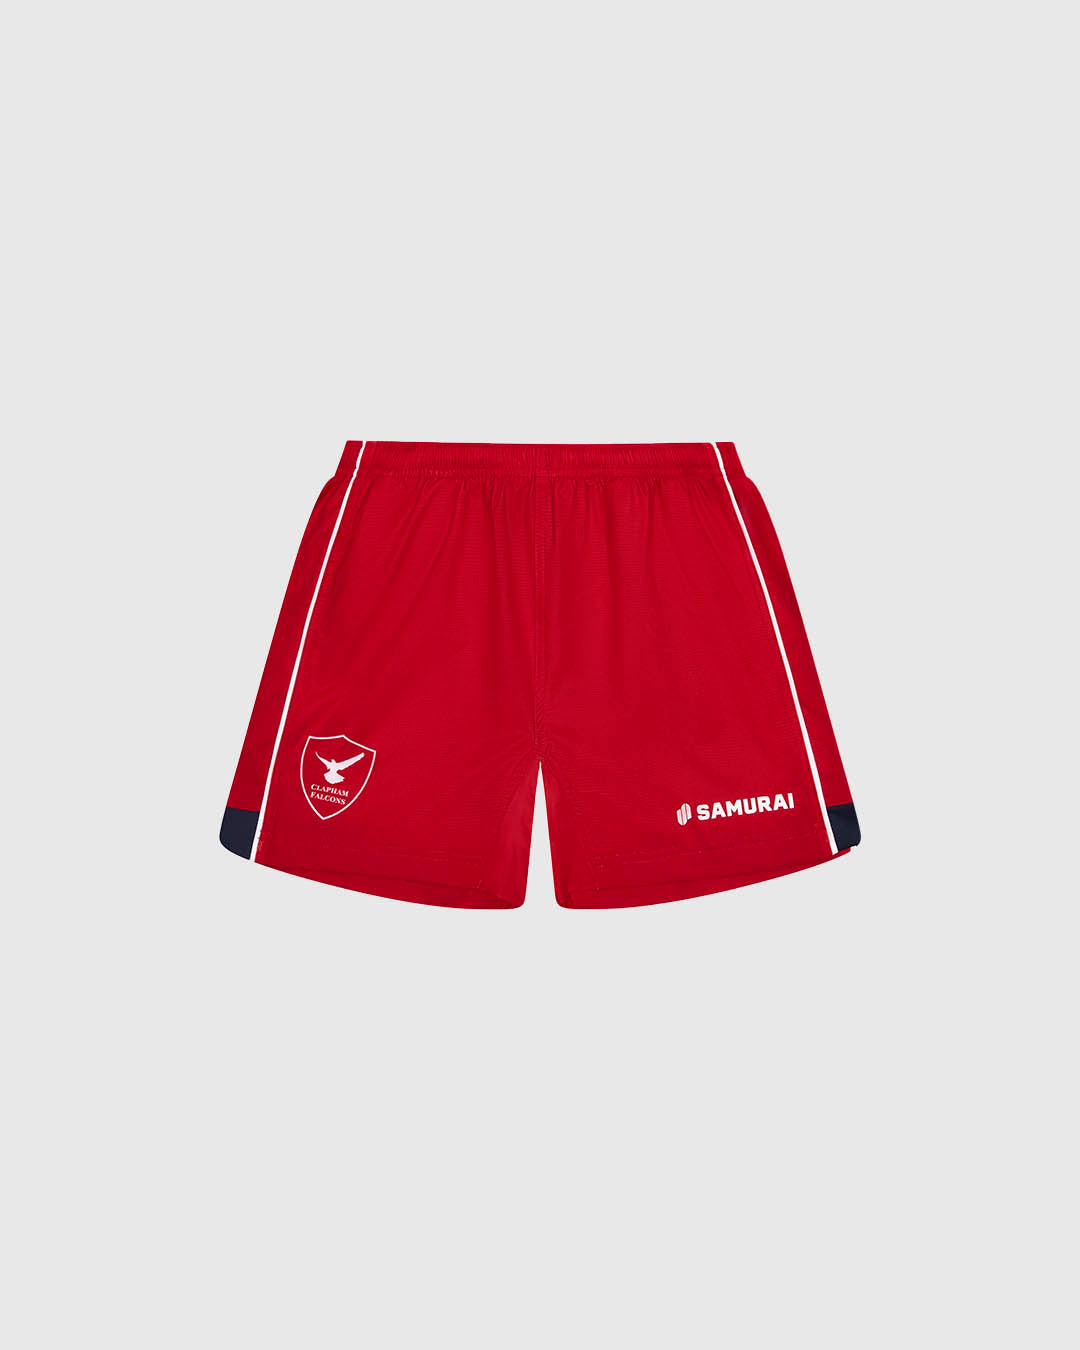 CF:011 - Clapham Falcons Rugby Shorts - Red